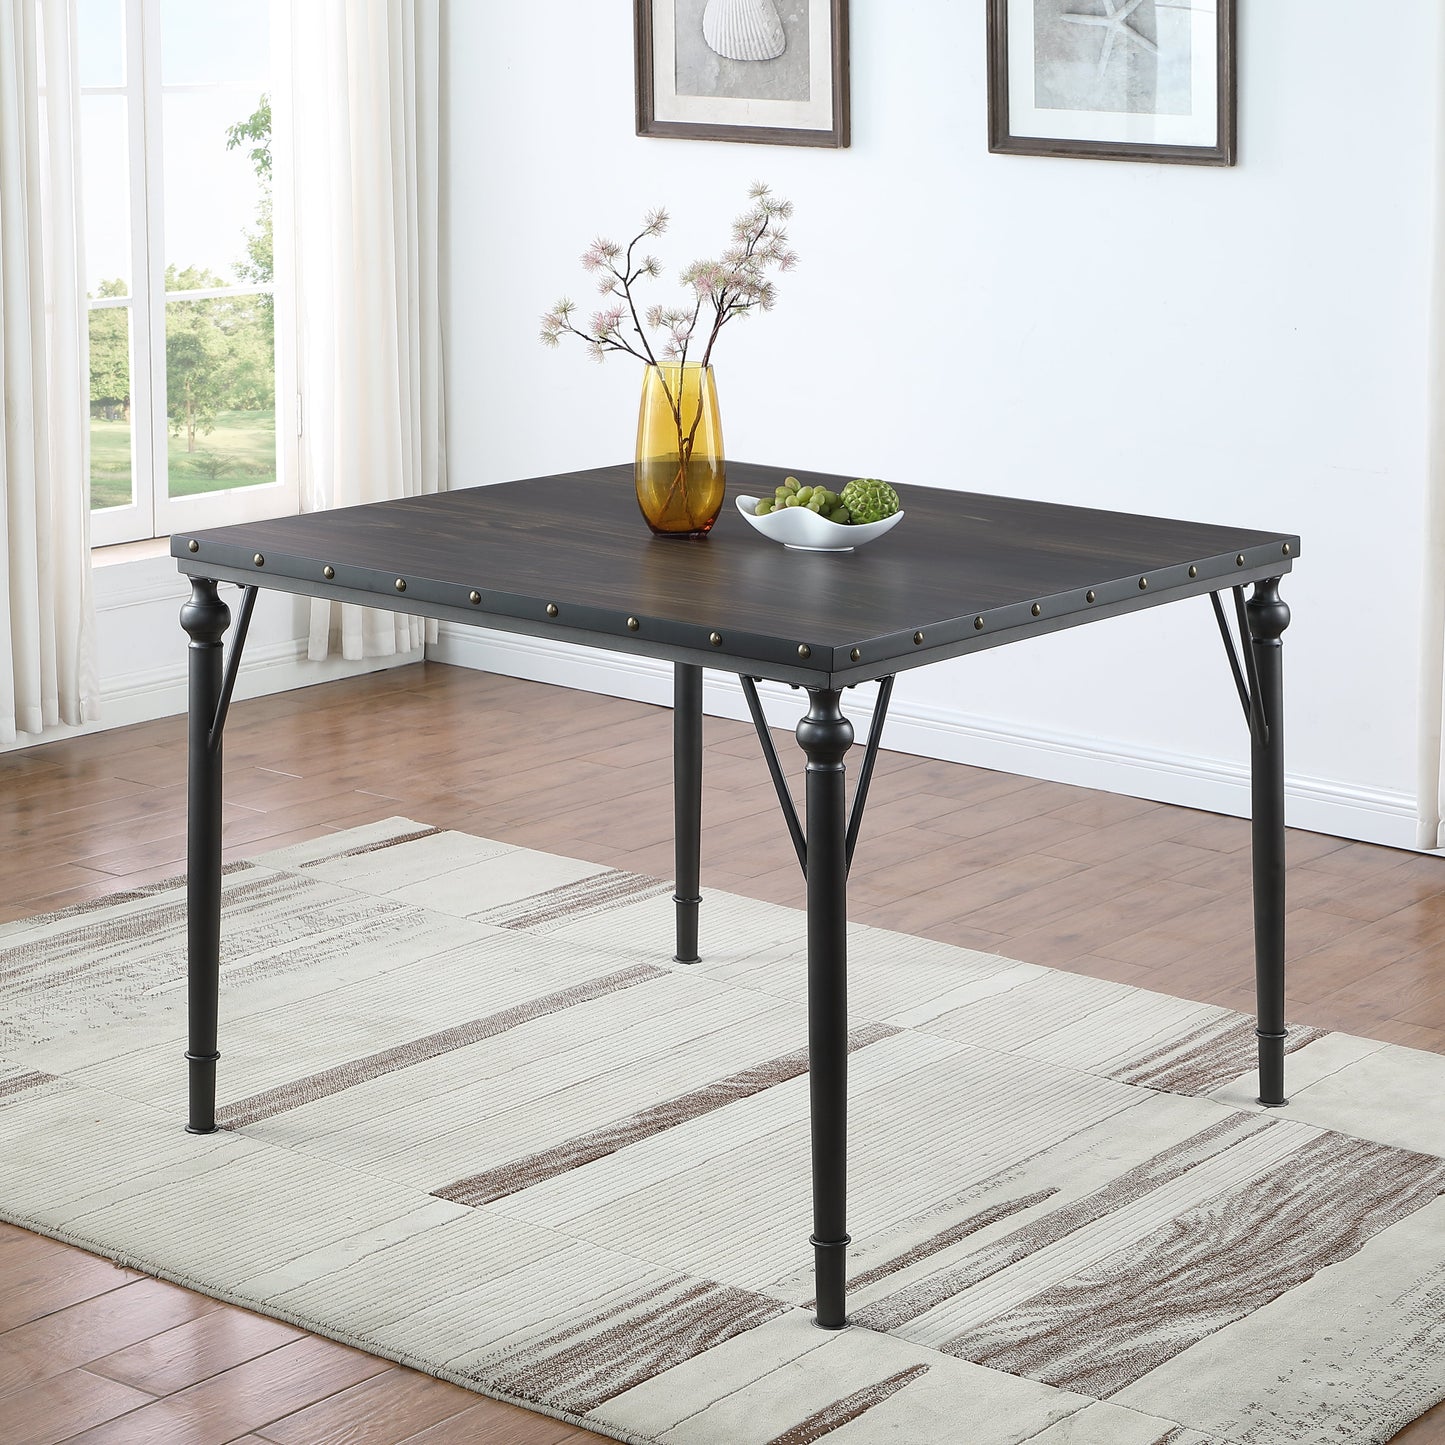 Biony Nailhead Counter Height Espresso Wood Dining Table with Metal Frame